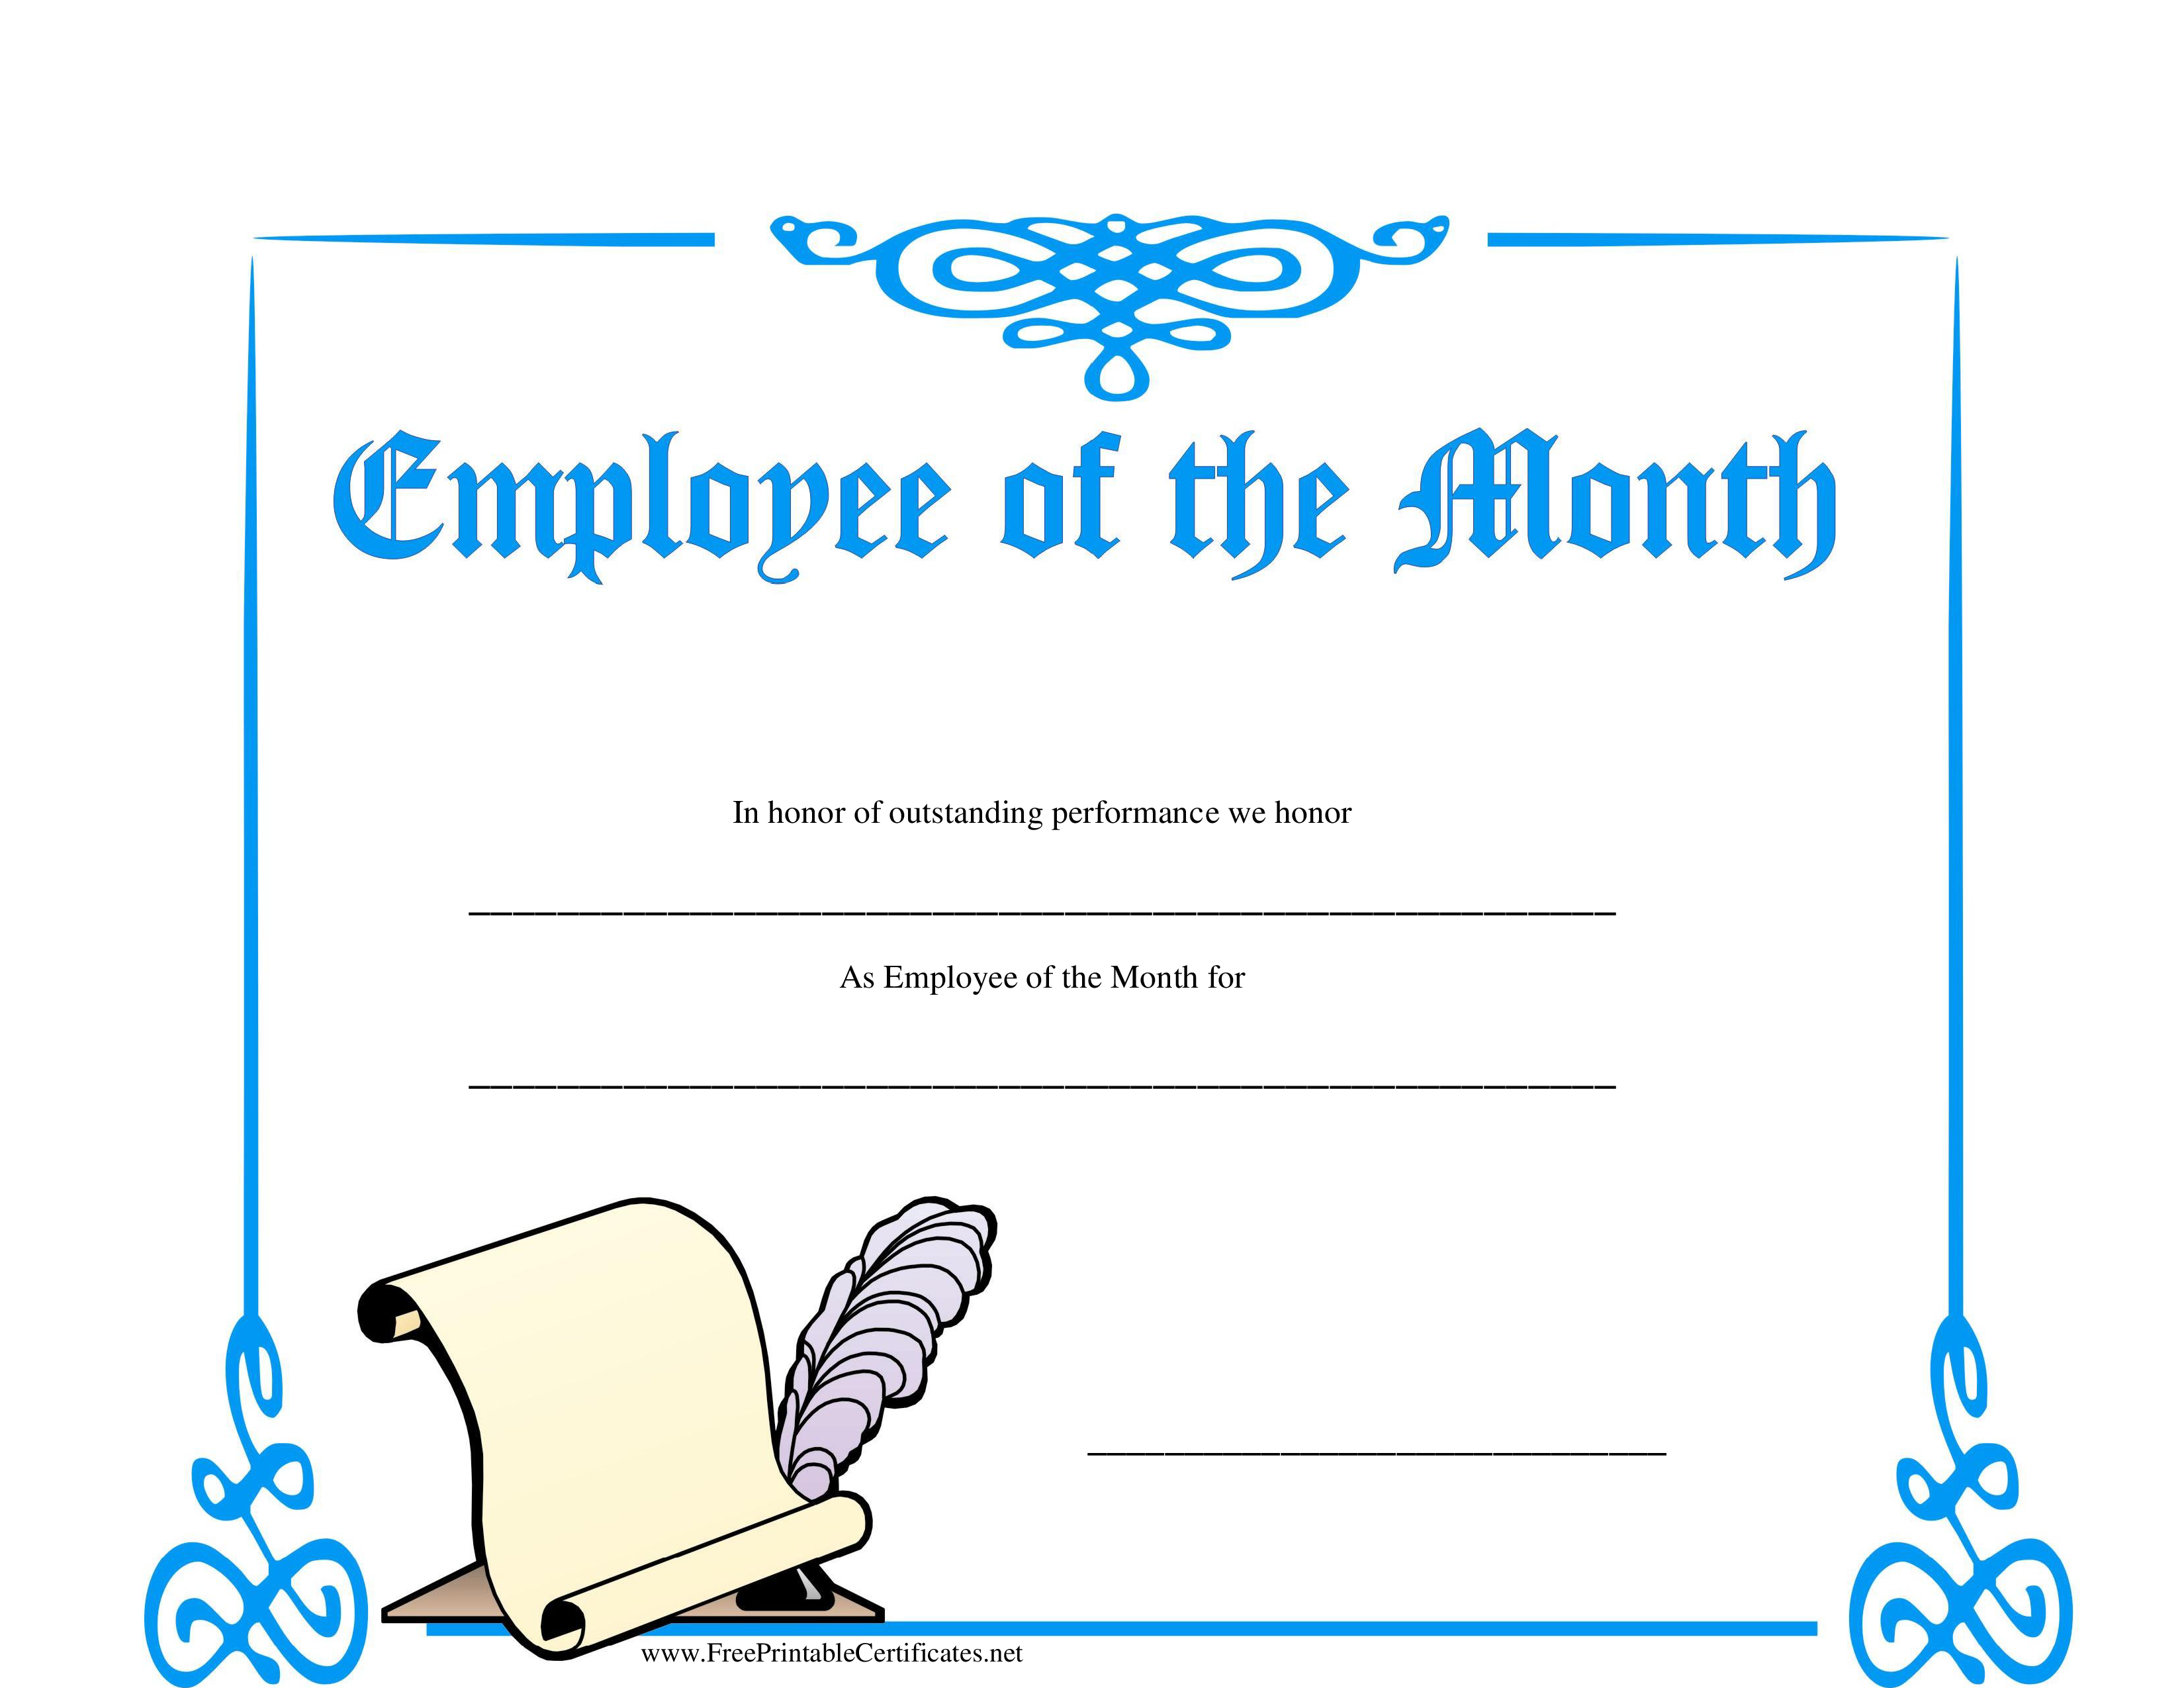 Certificate Of Employment Template